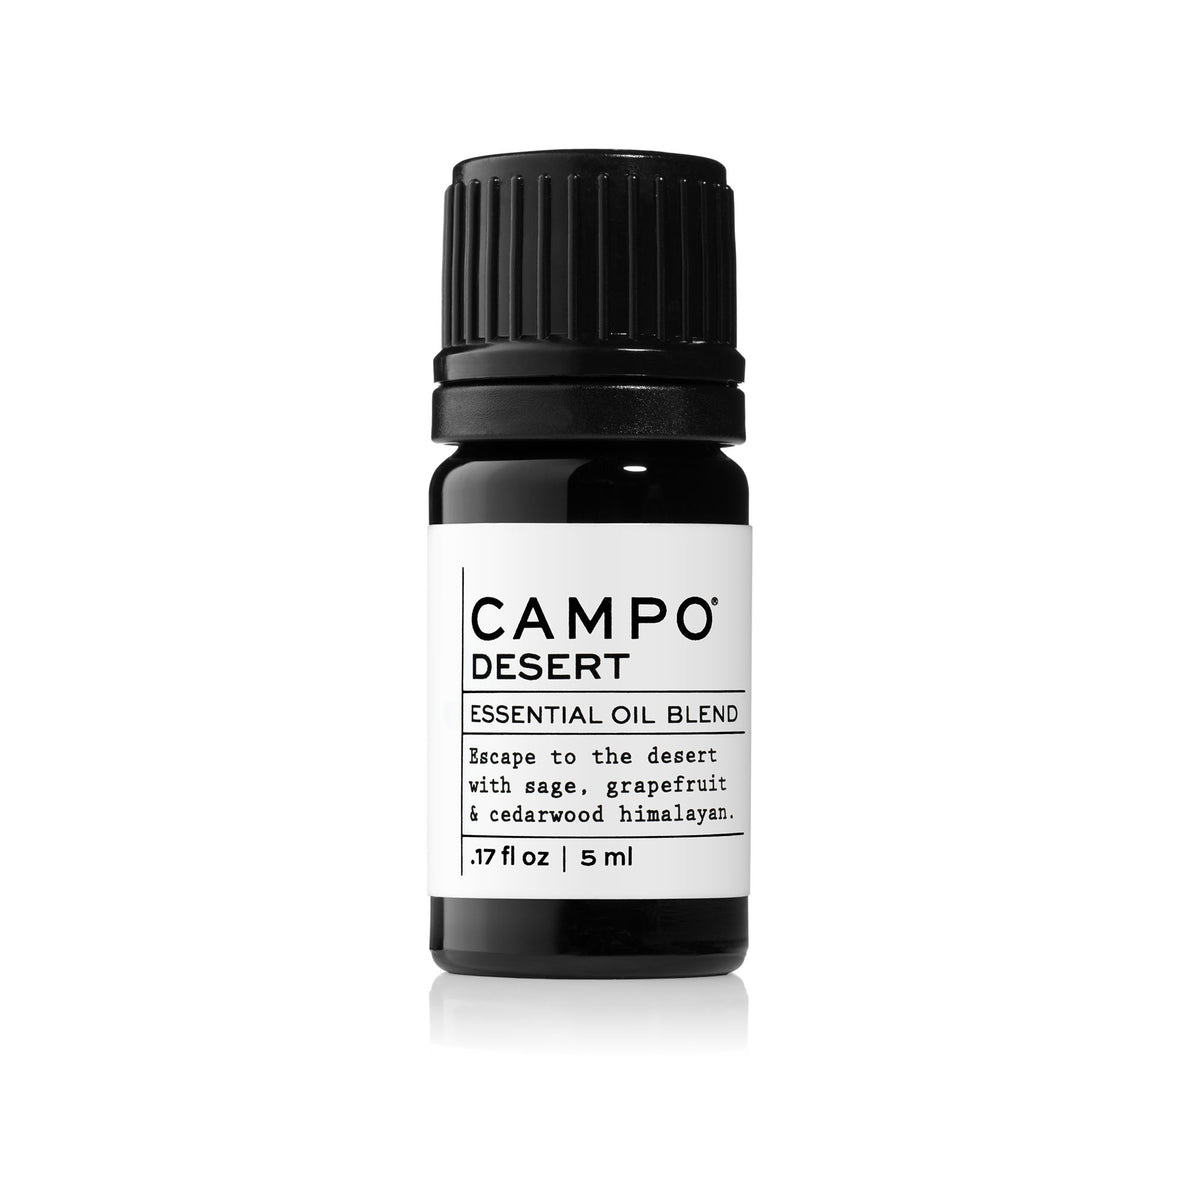 Campo Beauty DESERT Blend 5 ml Essential Oil. Escape to the desert with this 100% pure essential oil blend of grapefruit, sage, cedarwood texas, and cedarwood himalayan.